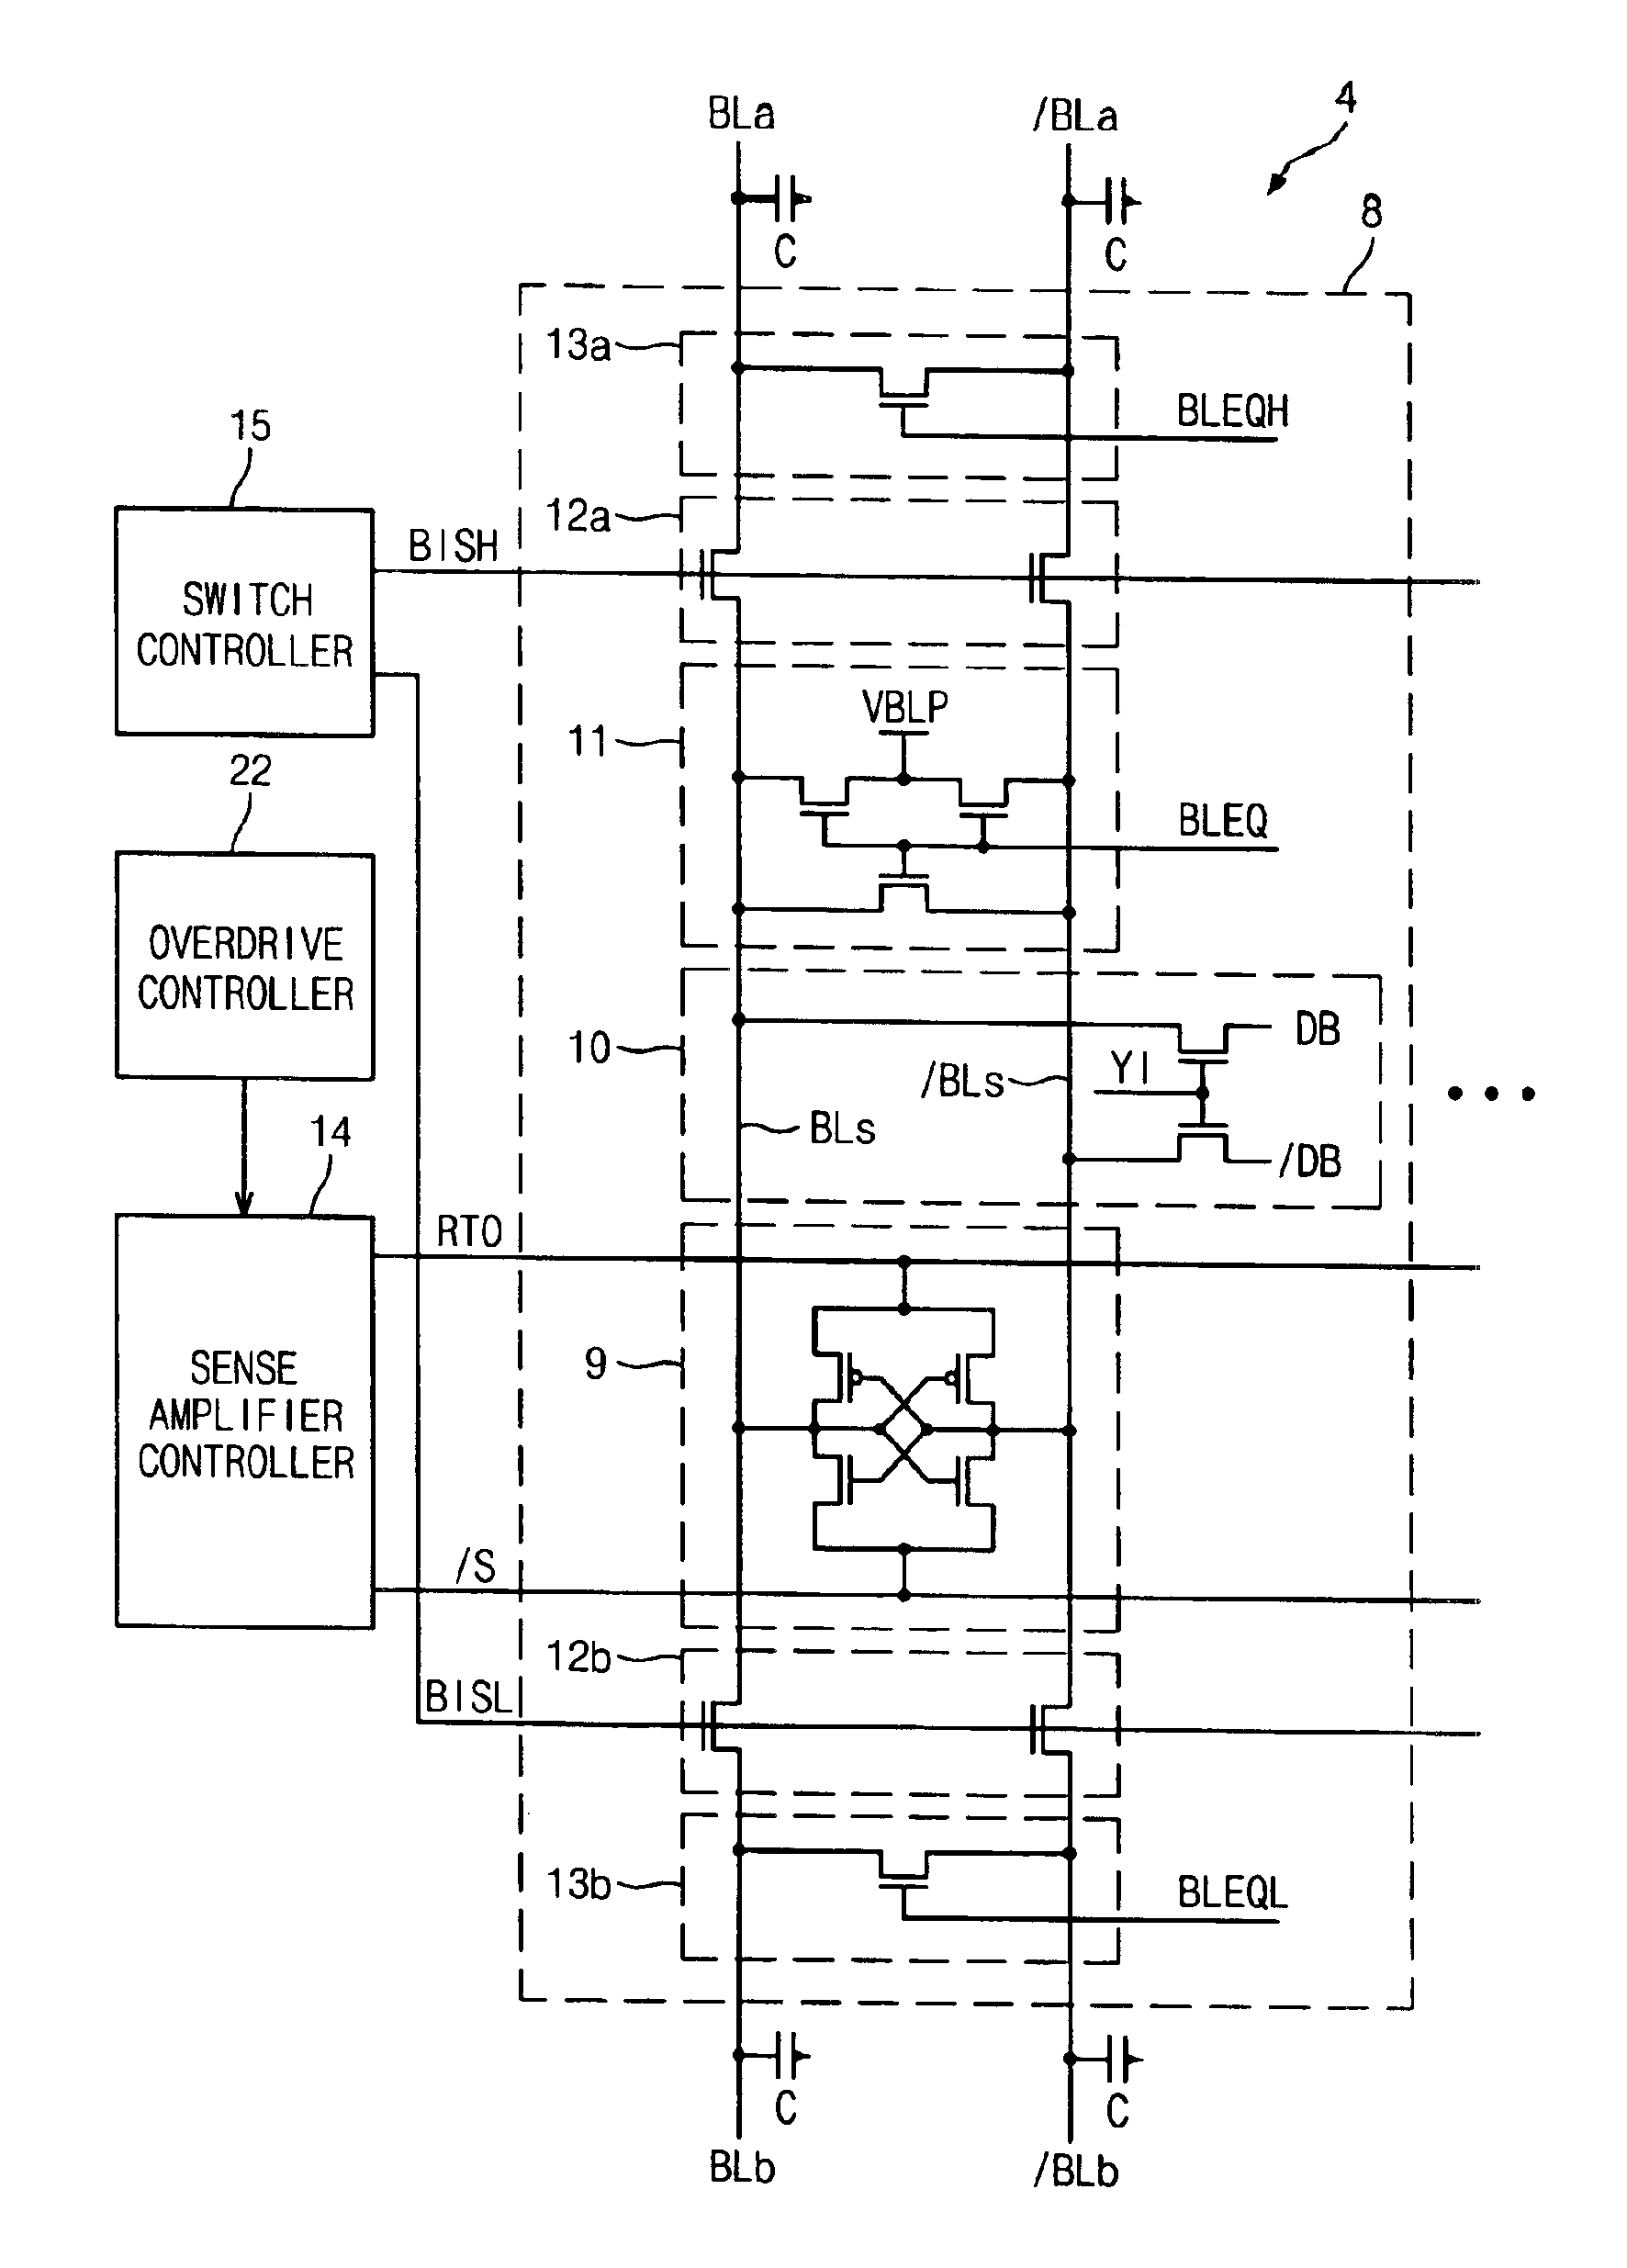 Semiconductor memory device having sense amplifier and method for overdriving the sense amplifier